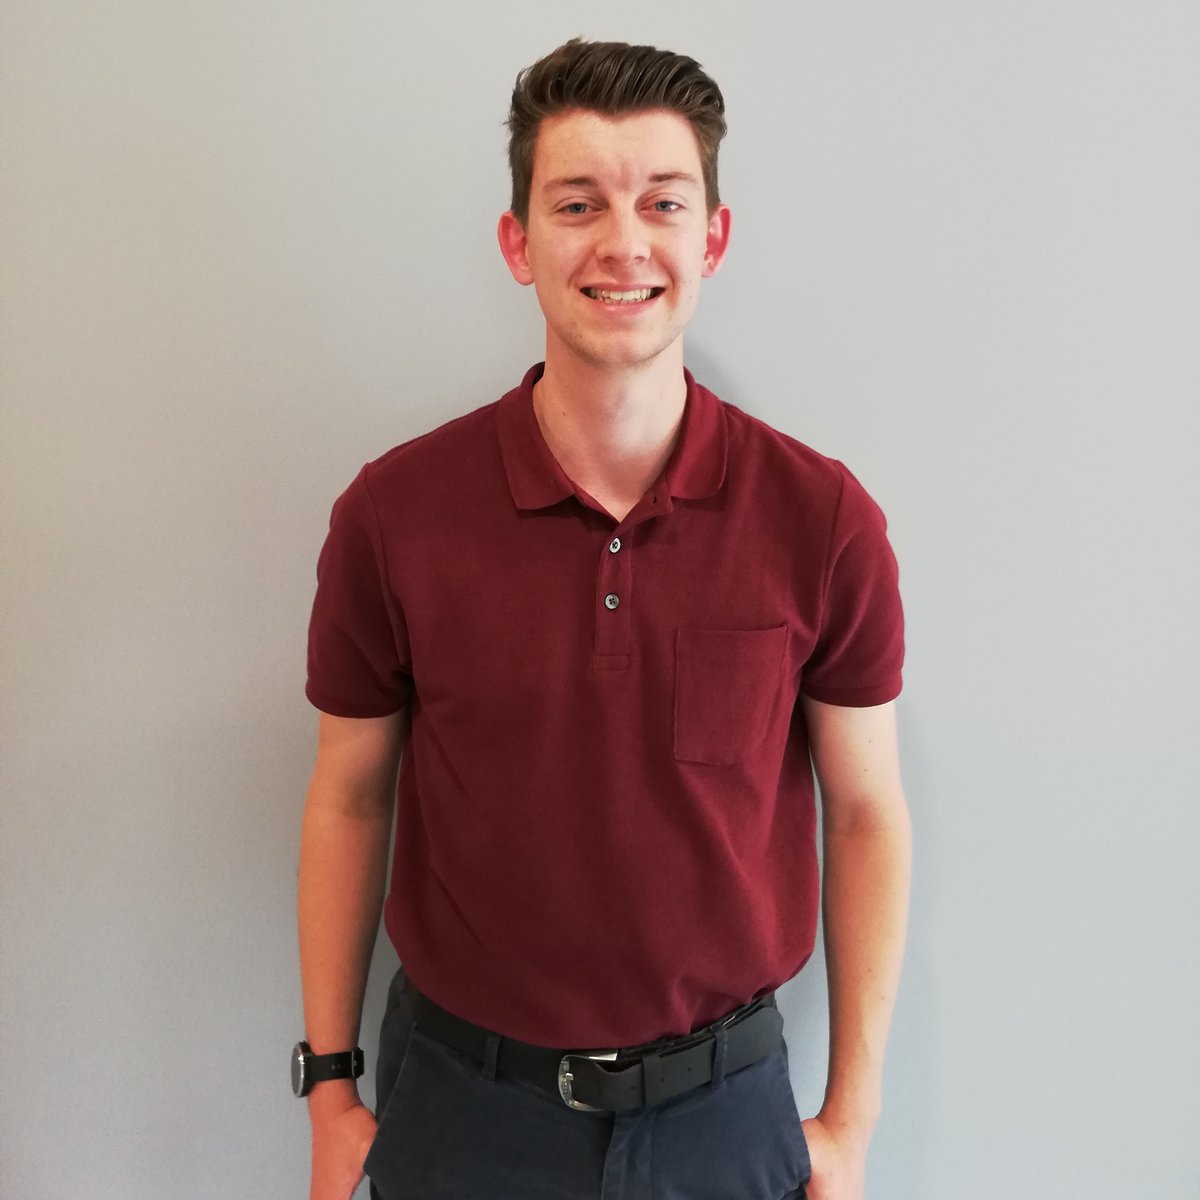 Introducing our new summer intern, Ewan Wadd! Ewan is a Mechanical and Electrical Engineering student at Bristol University, and will be with us until the end of August working on our testing equipment. Welcome aboard Ewan!